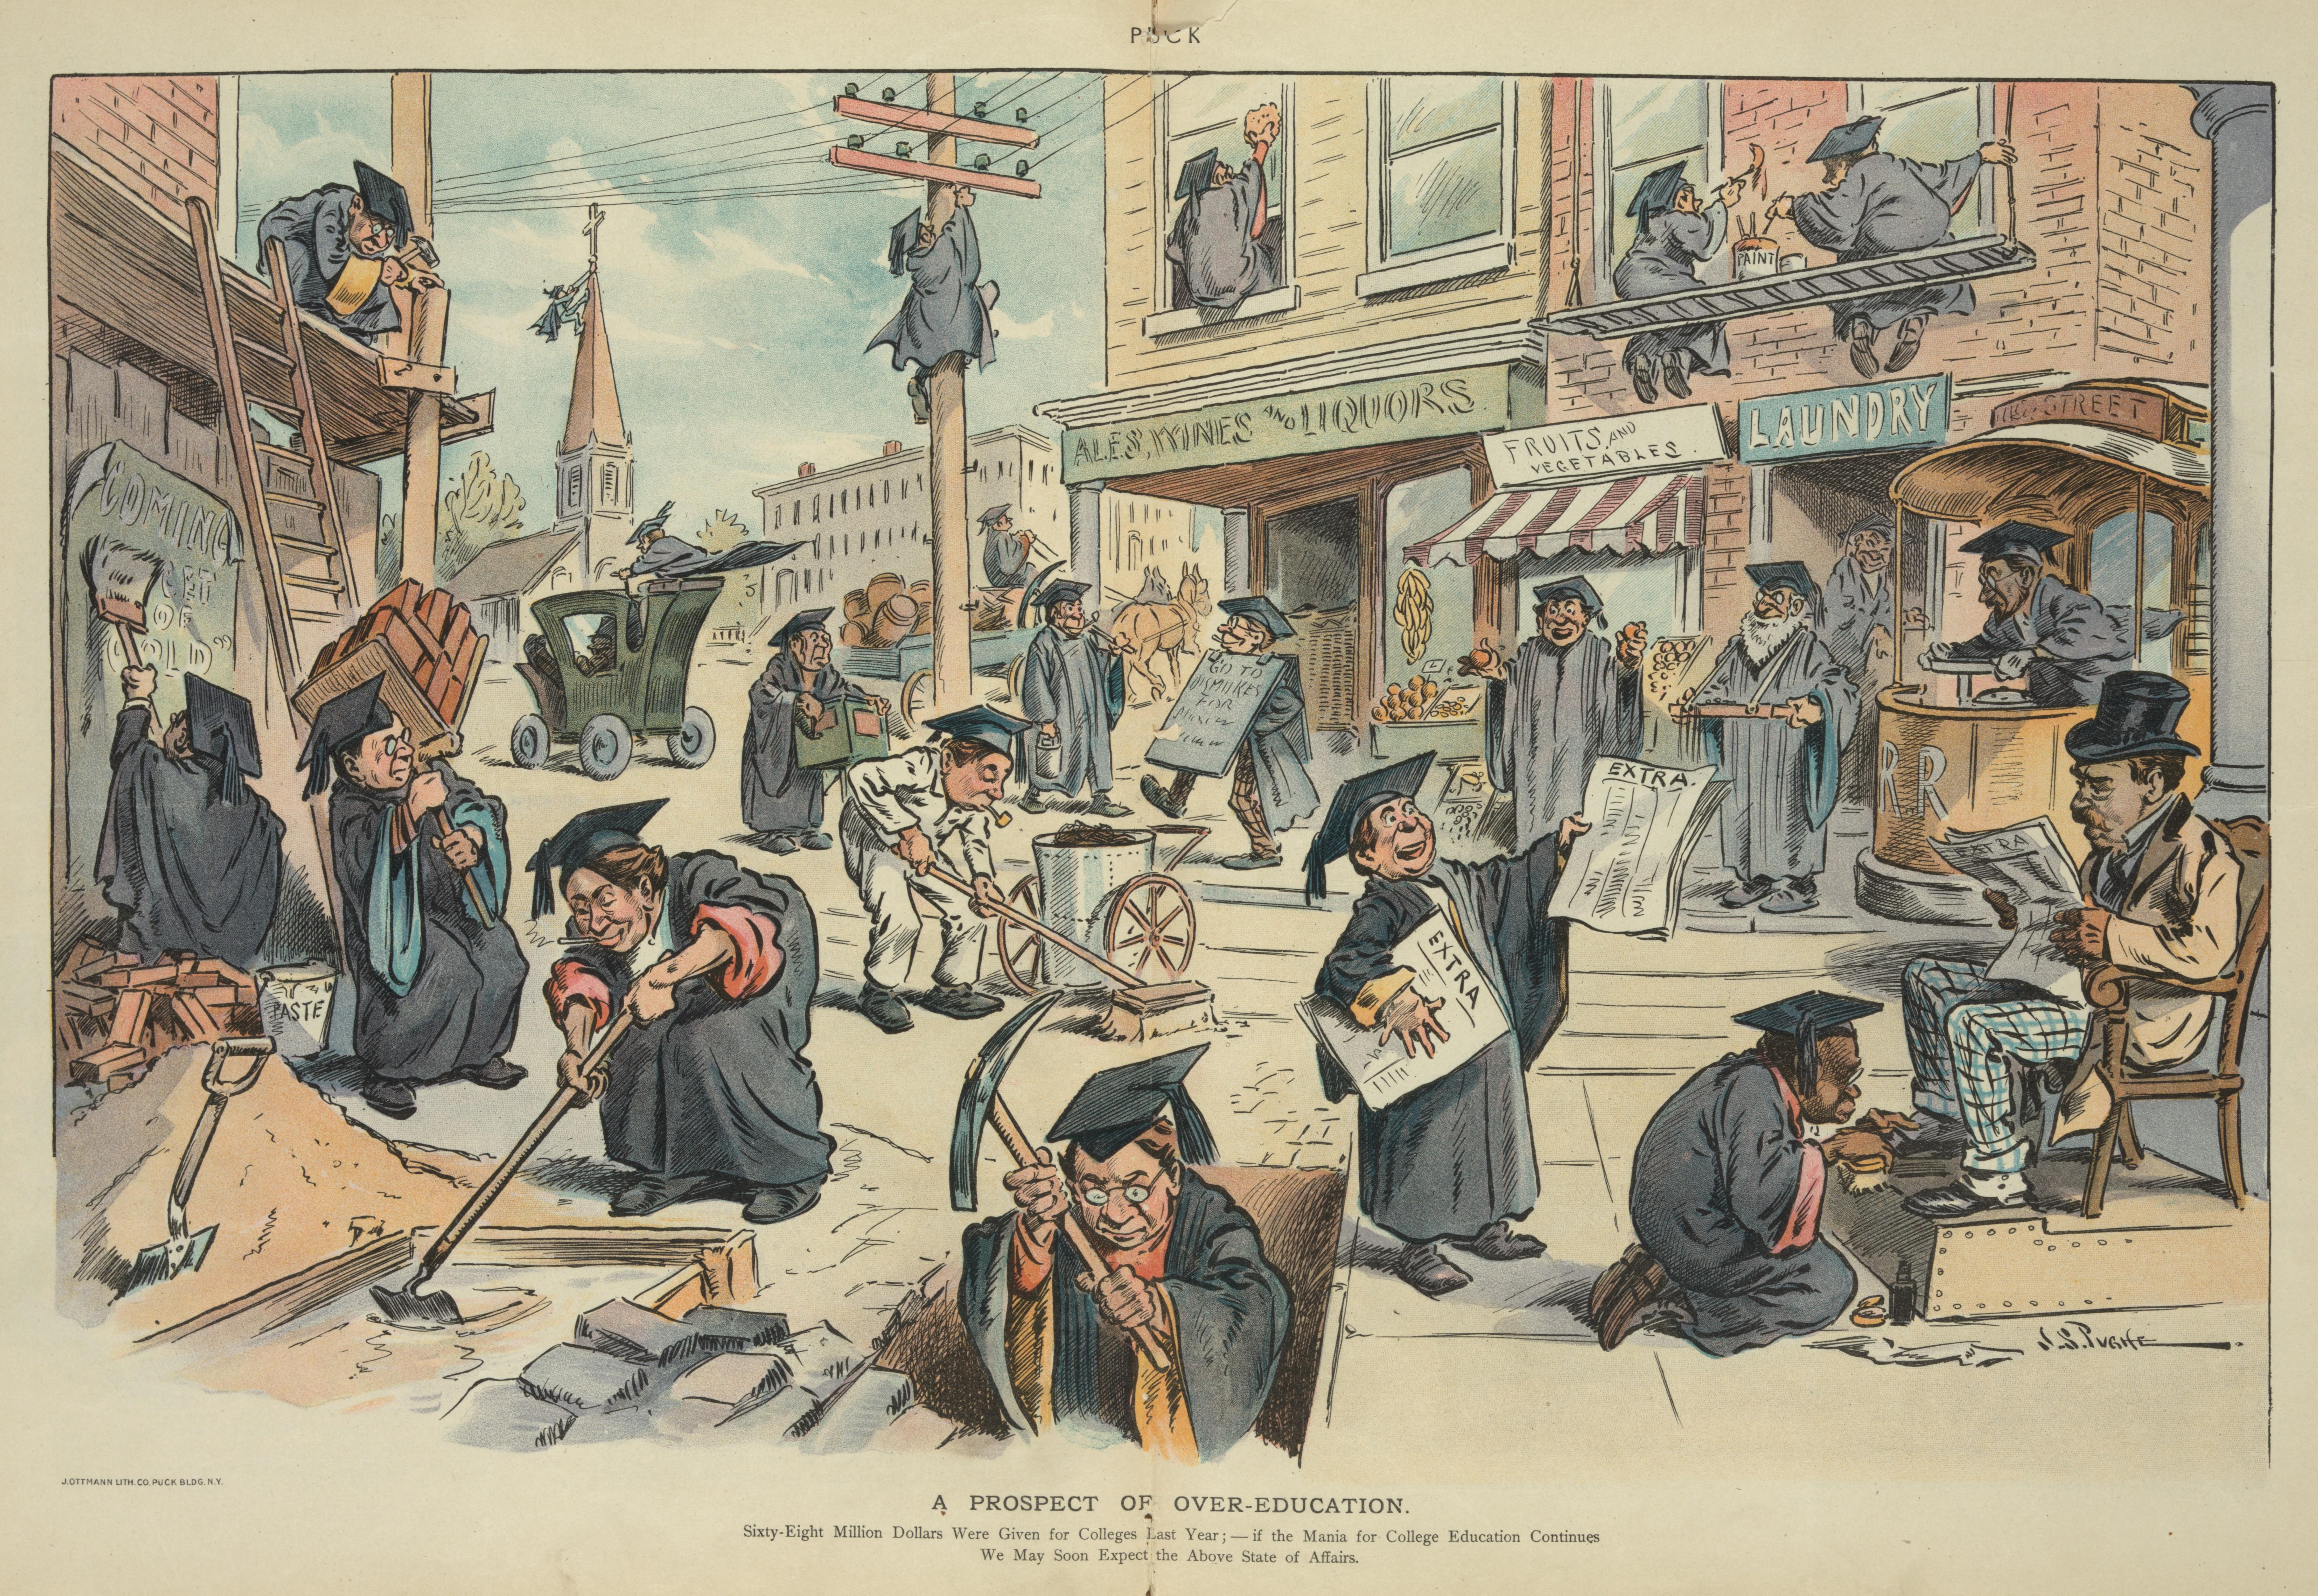 A Prospect of Over-Education, a humoristic caricature from Puck, 1902.jpg